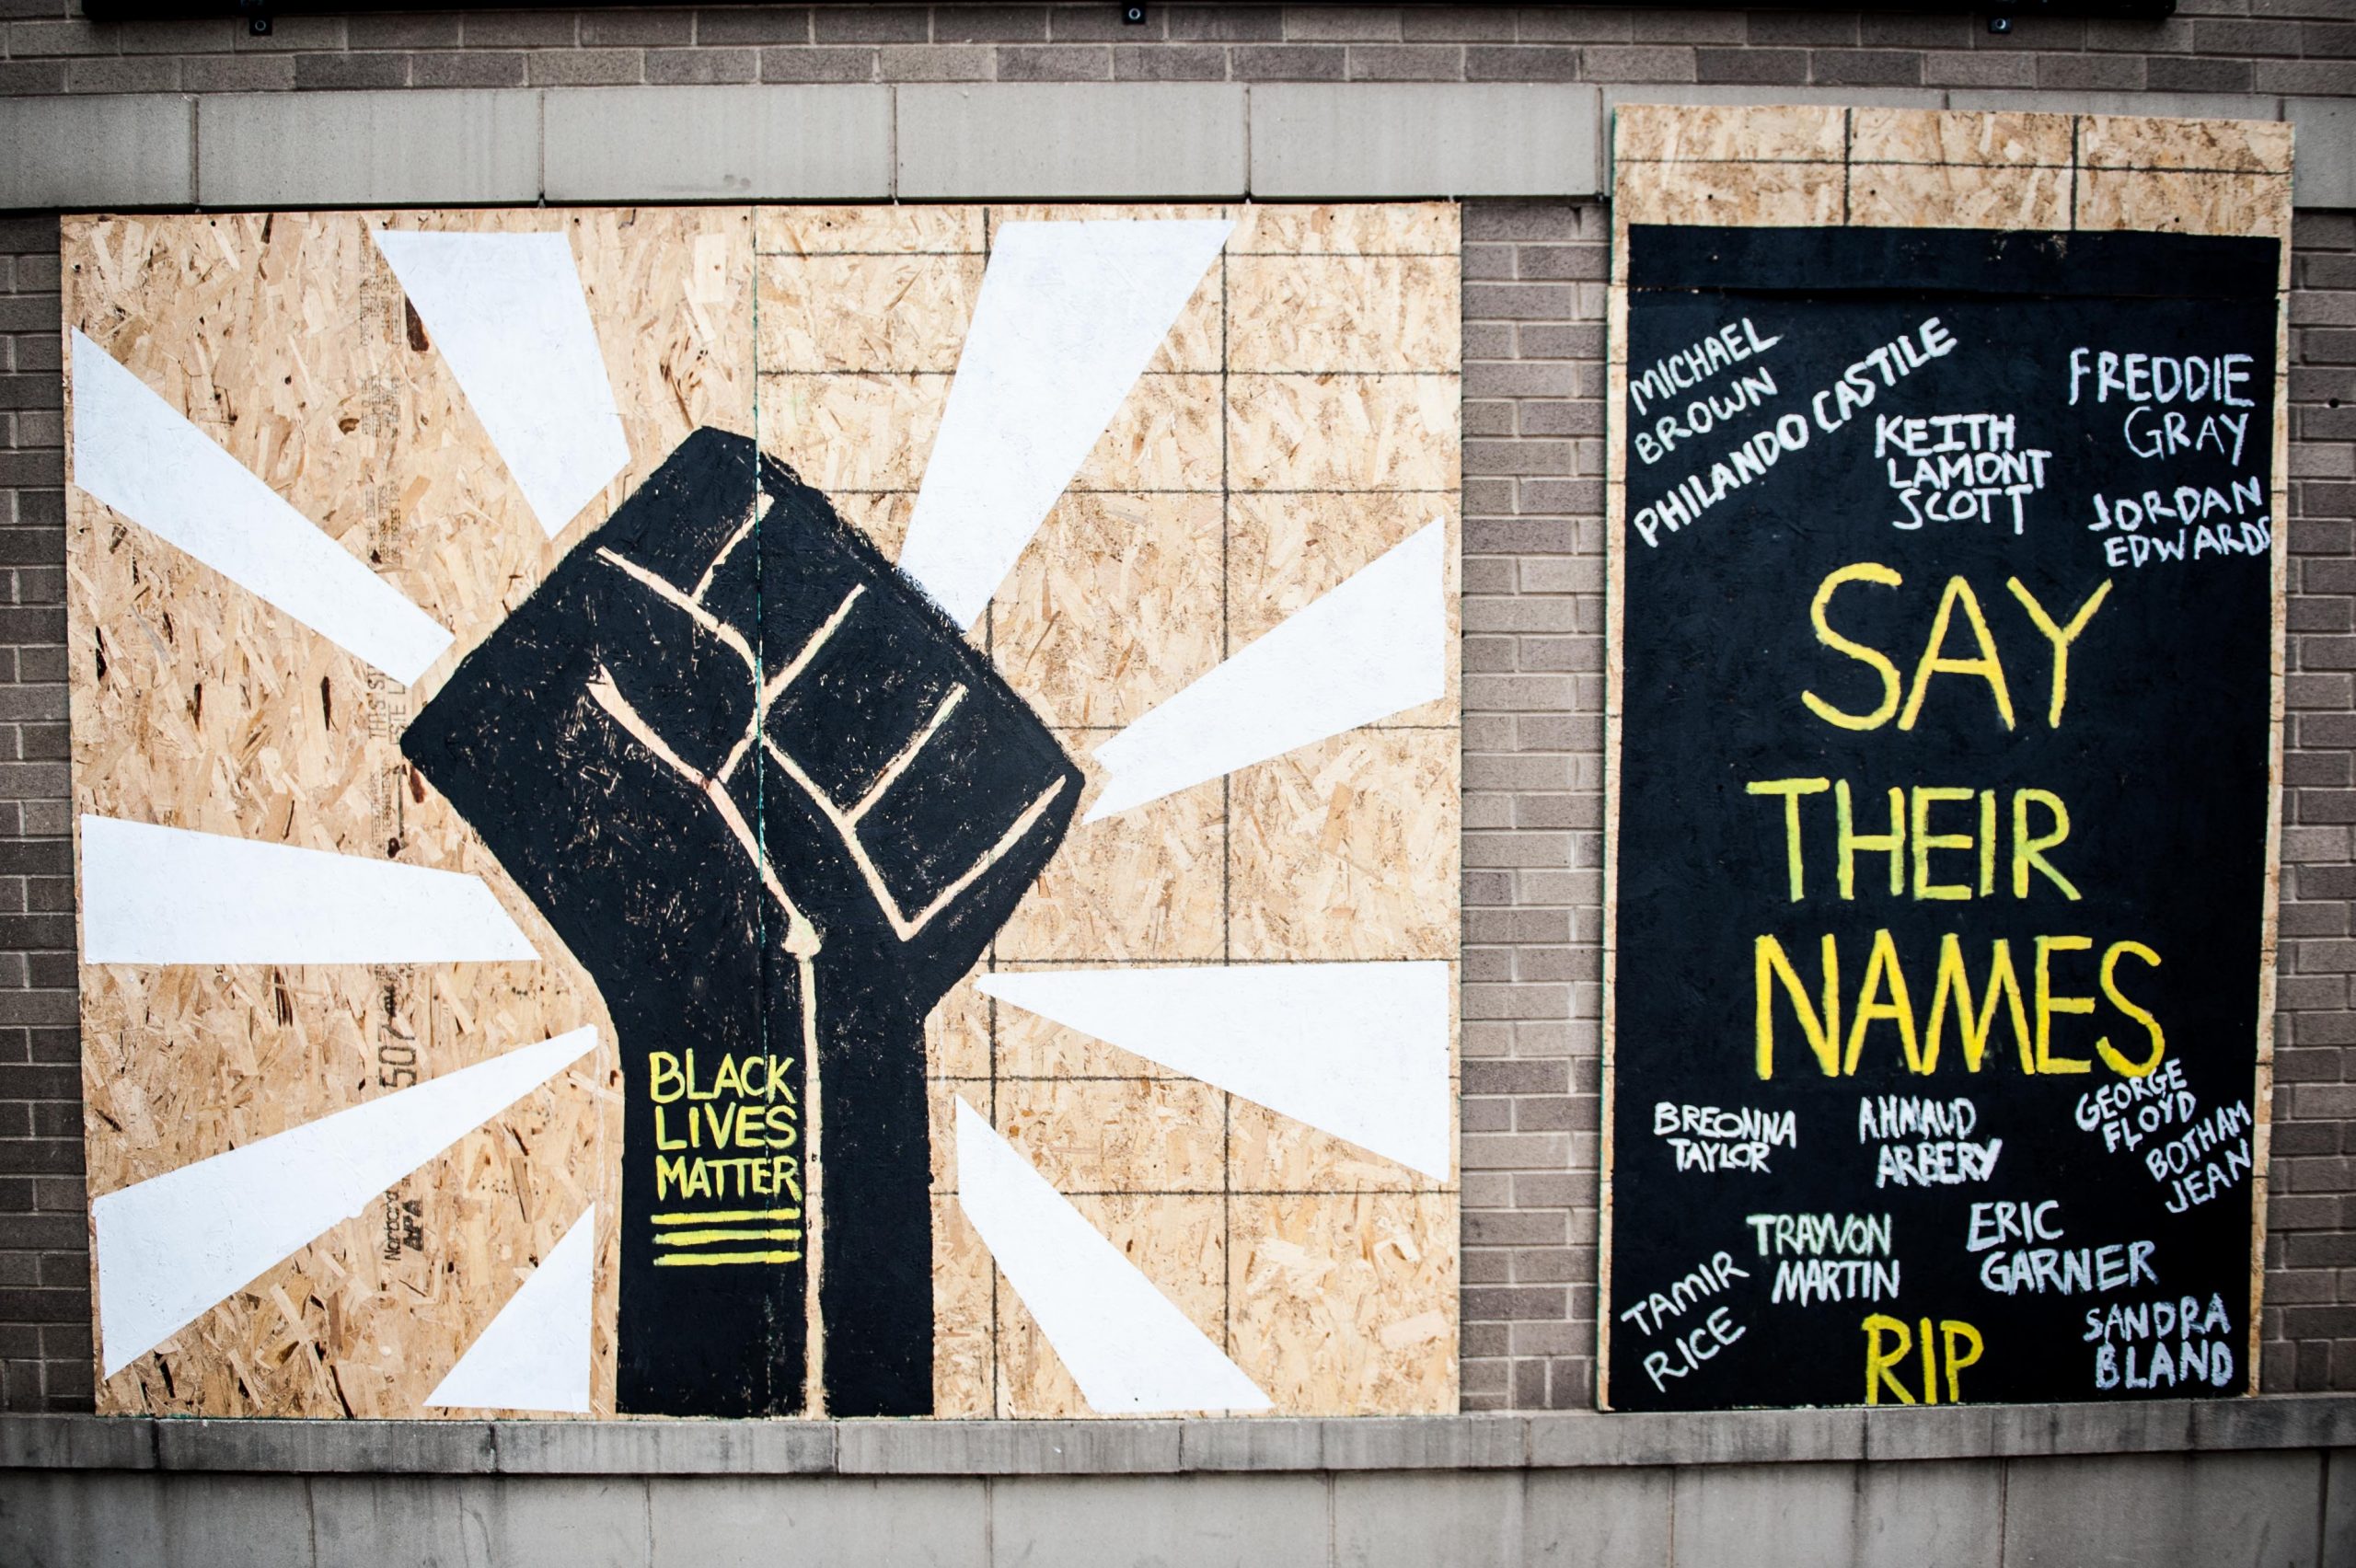 Two board murals. The left one features a solidarity fist with the words "Black Lives Matter." On the right is says "Say Their Names" and lists the names of many of the black victims of police violence.